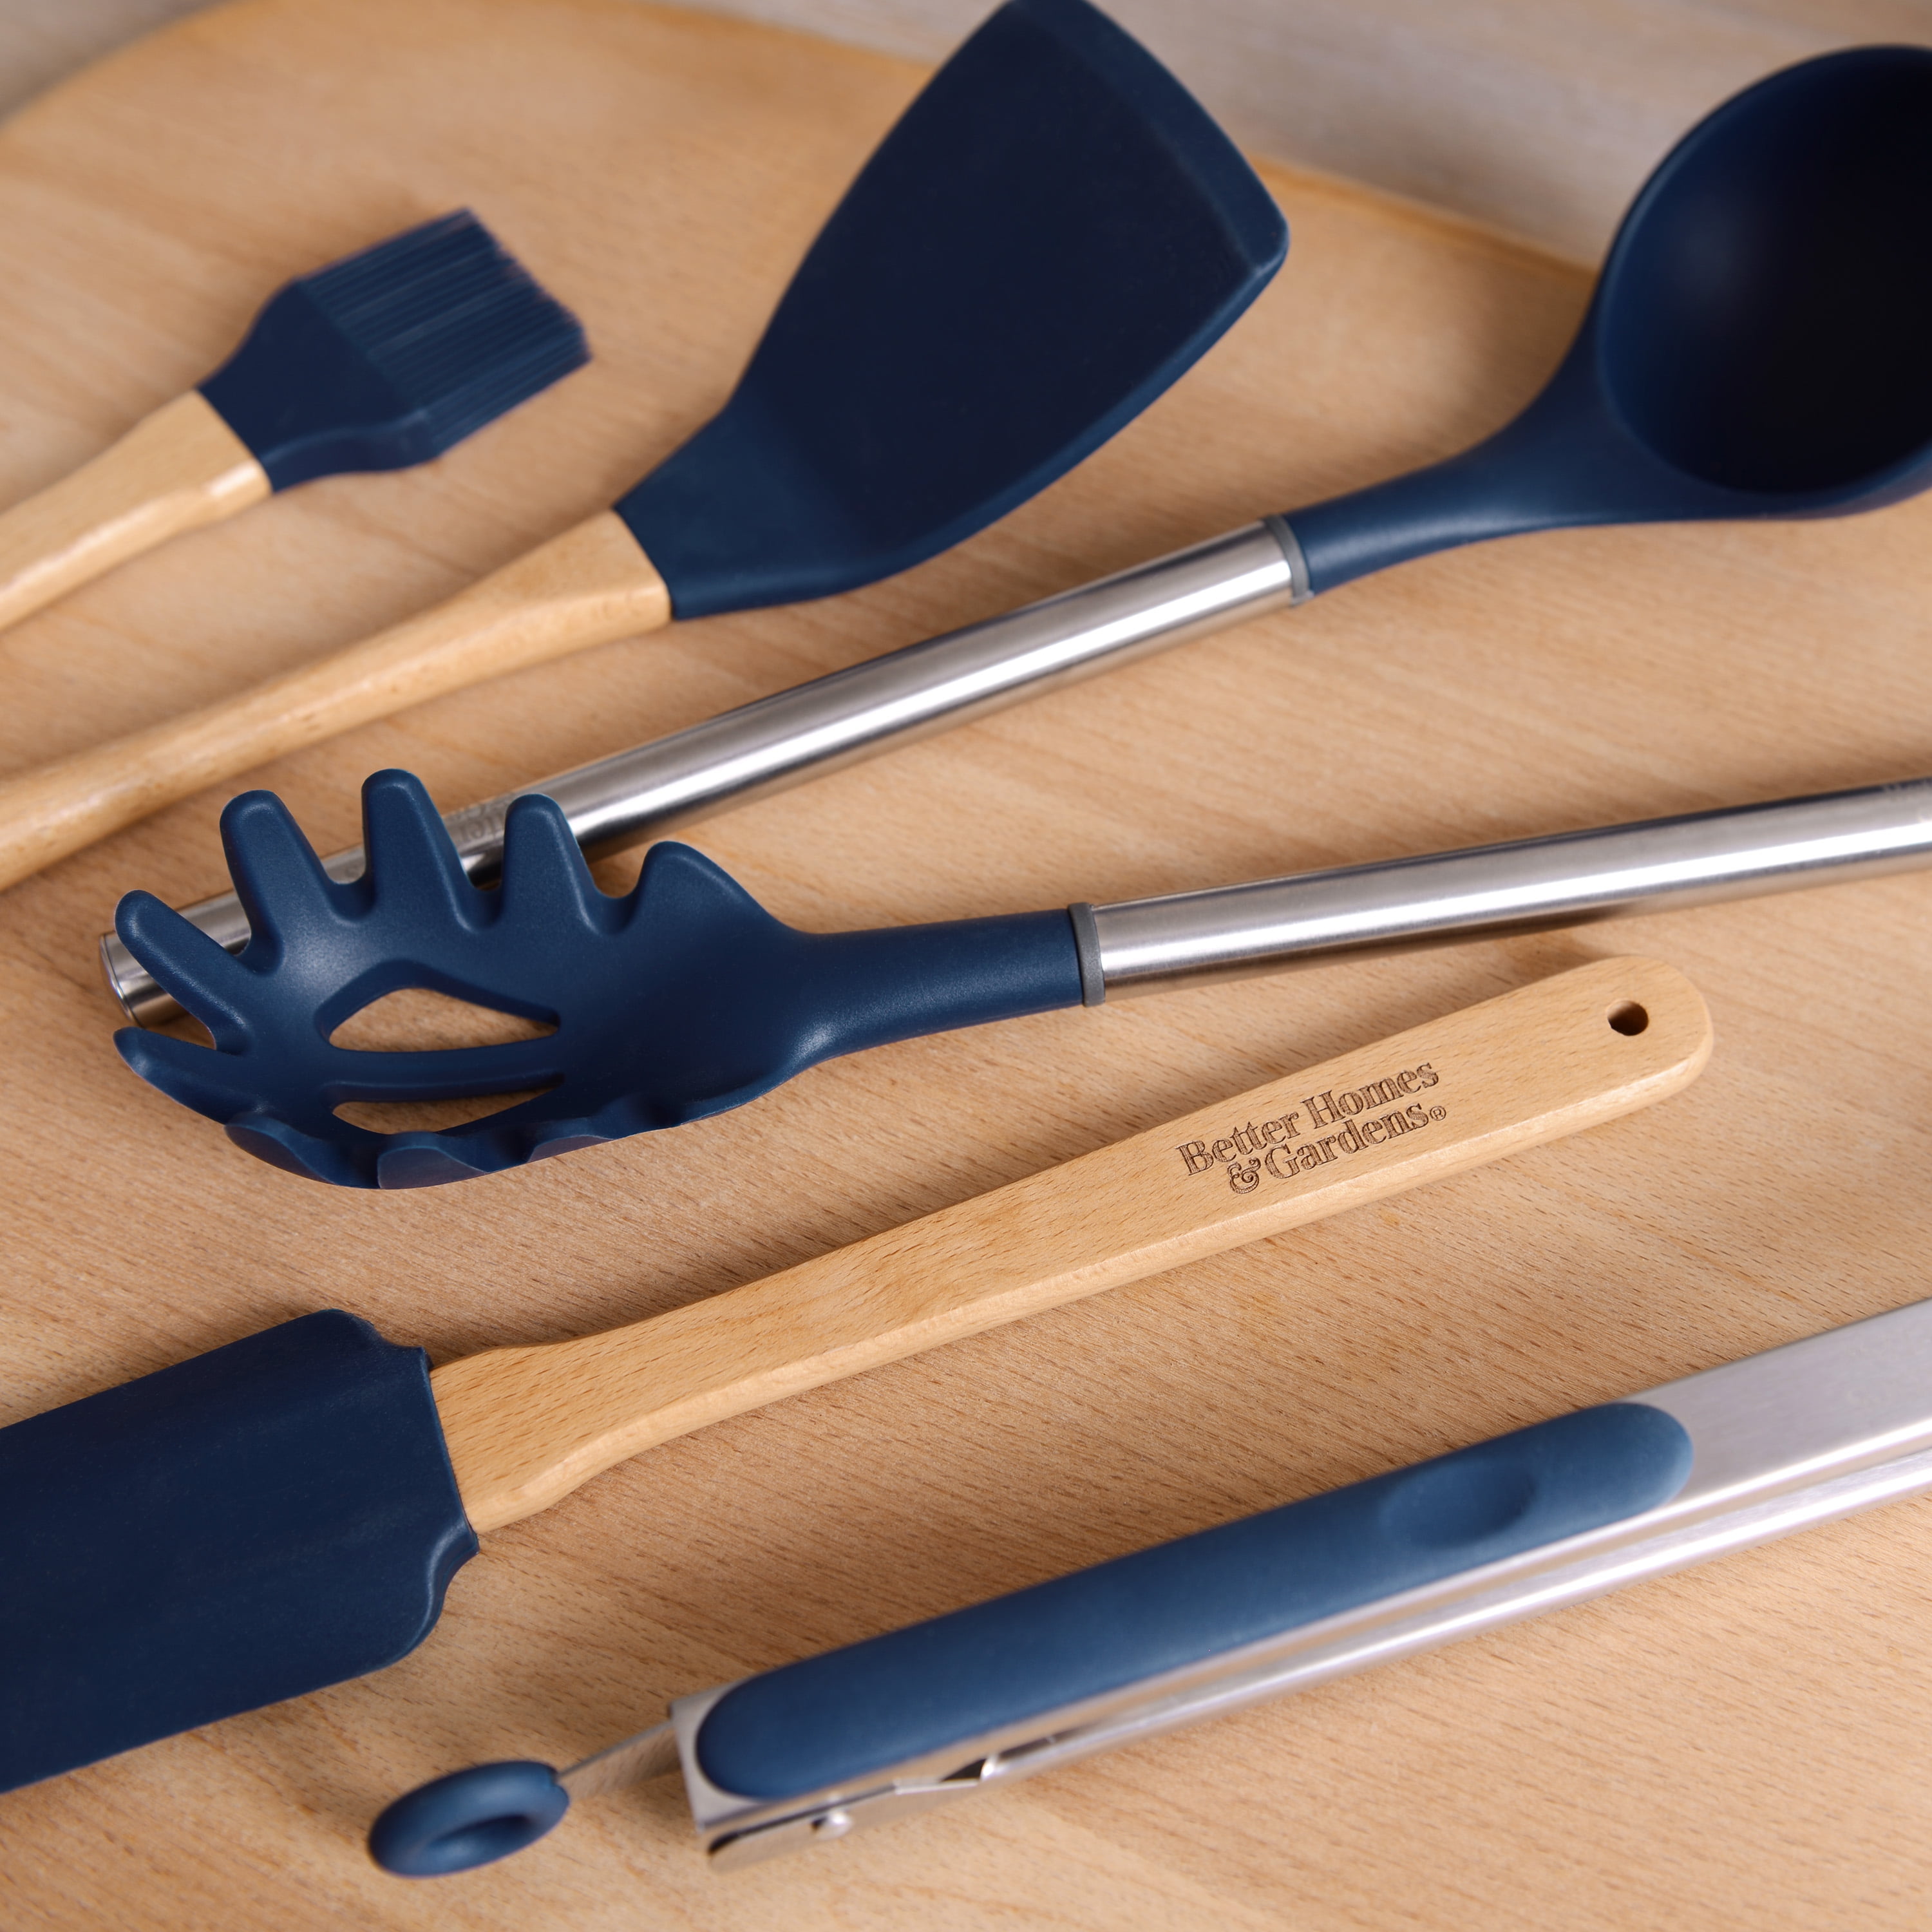 Maison Cooking Utensil Set | Serena & Lily